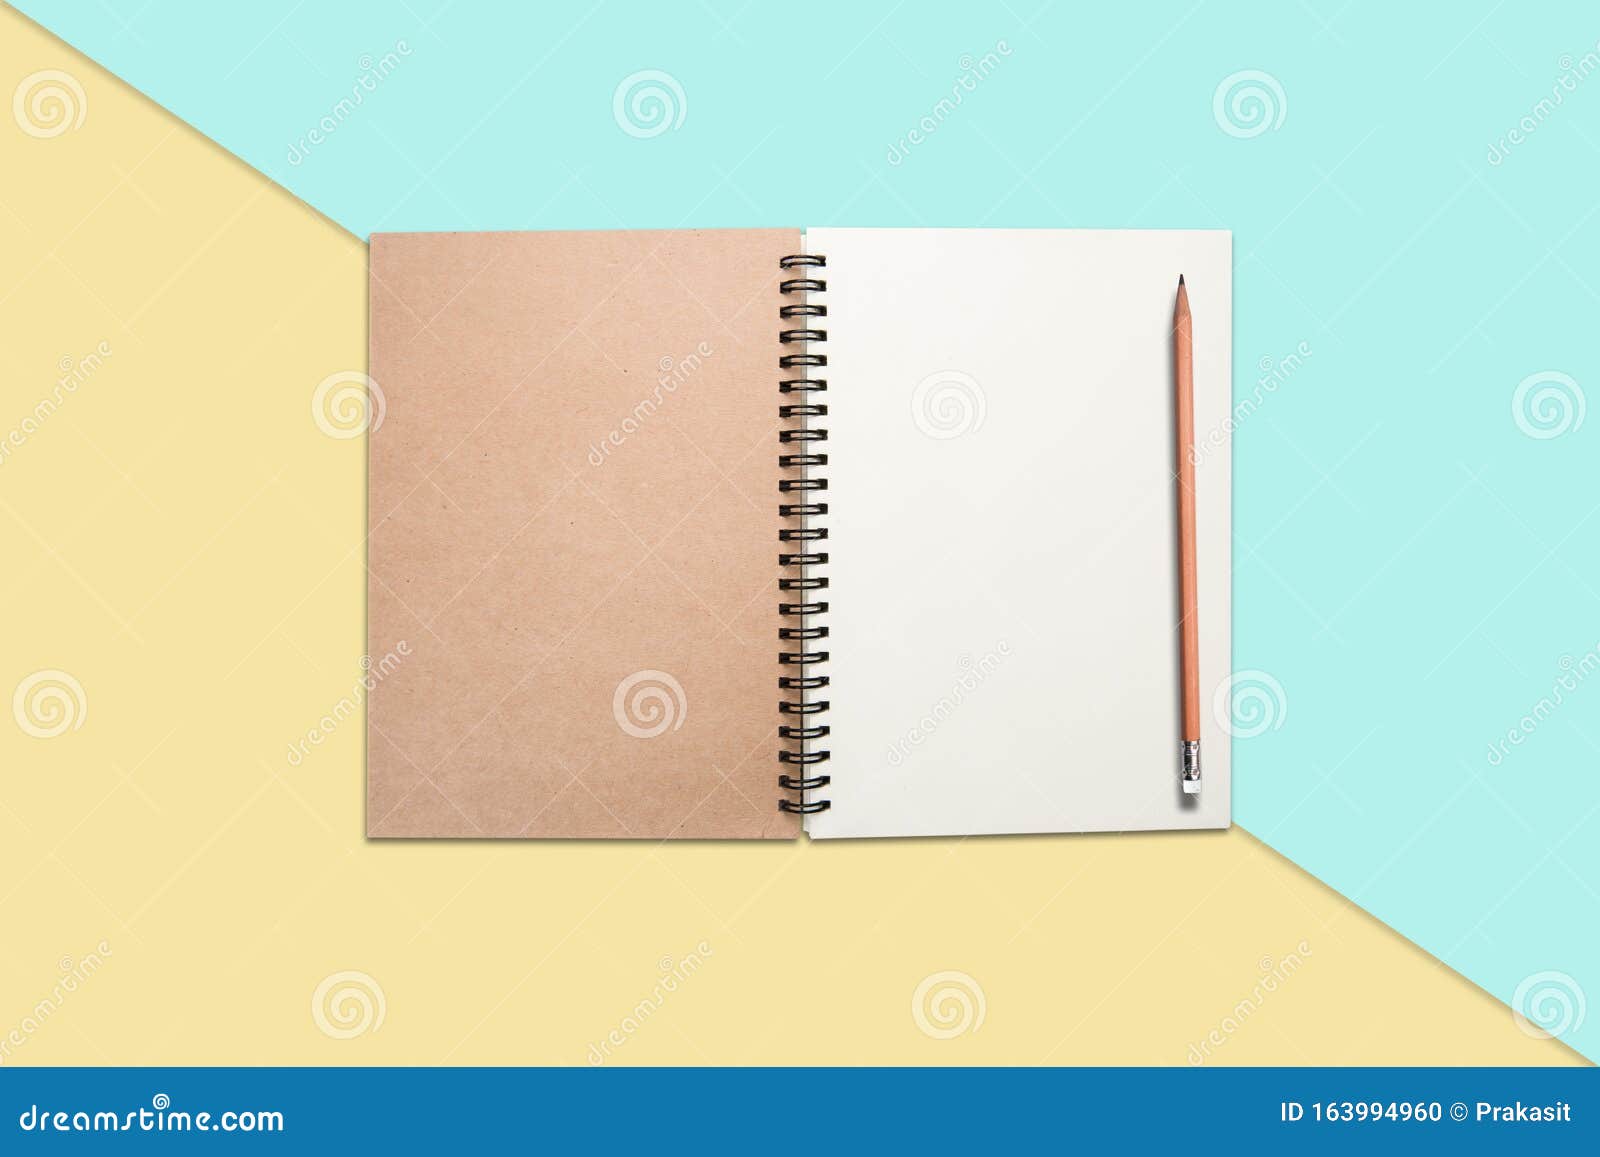 notebook and pen on colore